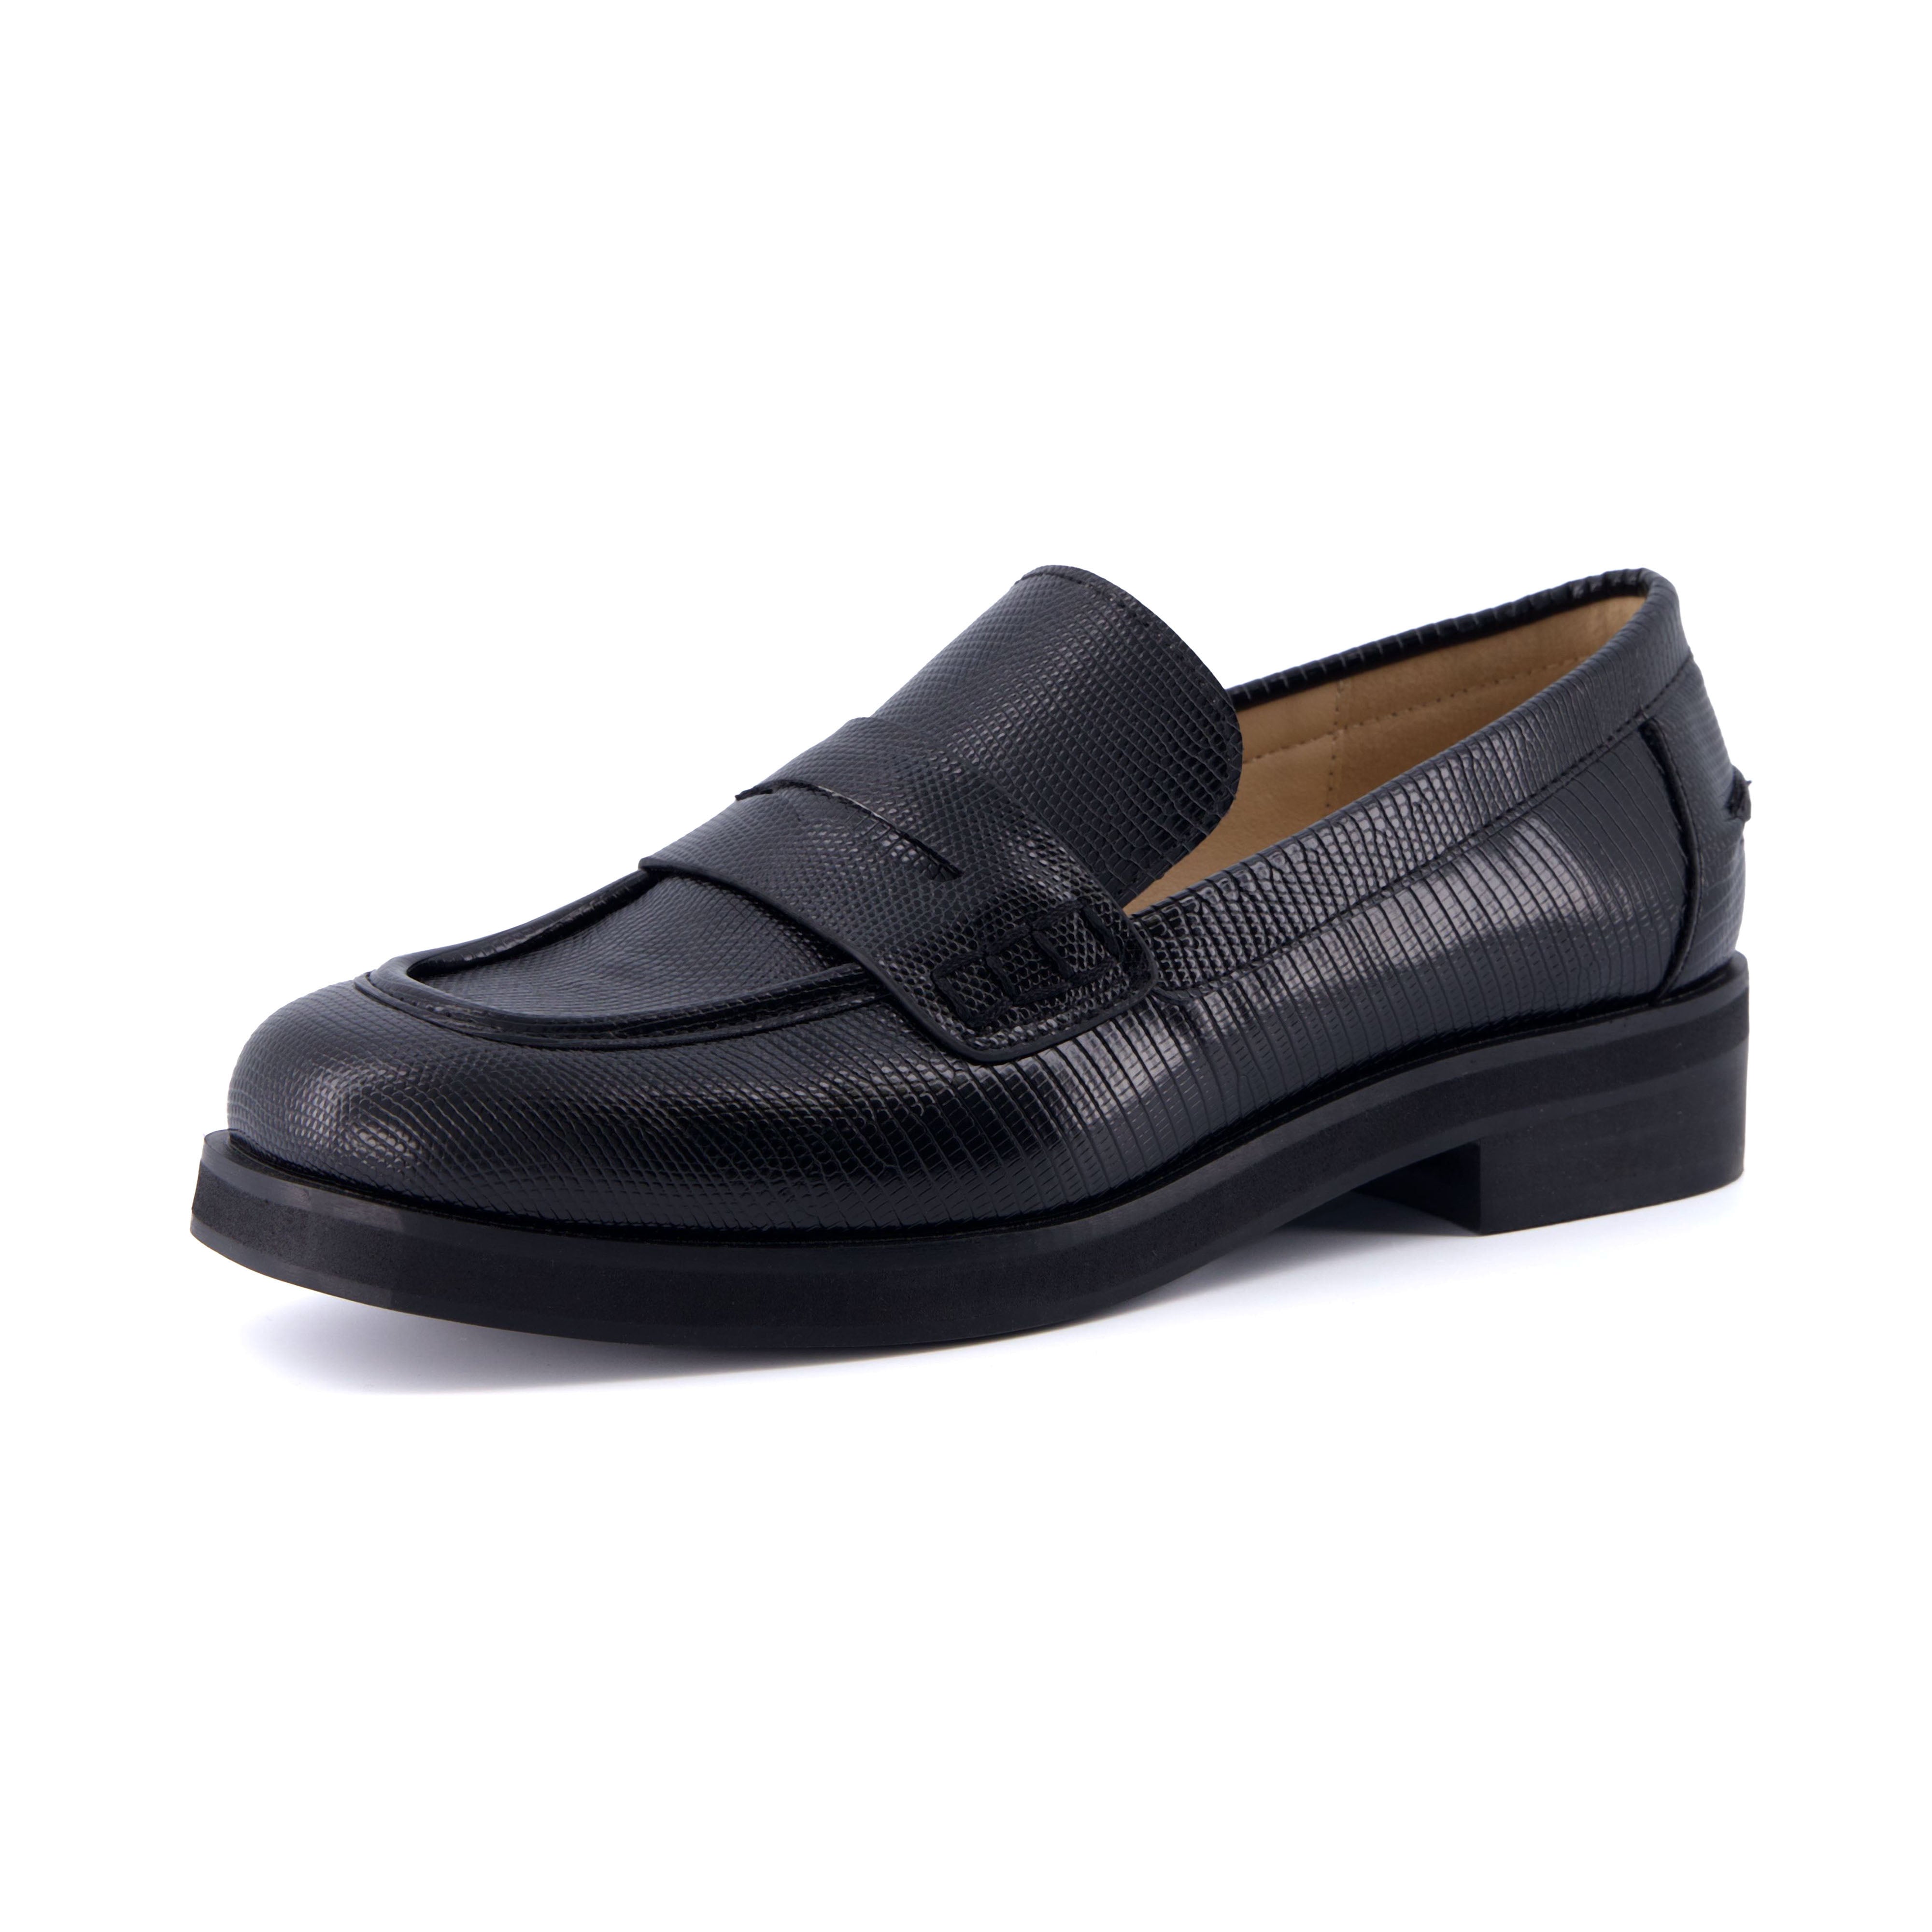 Charade Penny Loafer